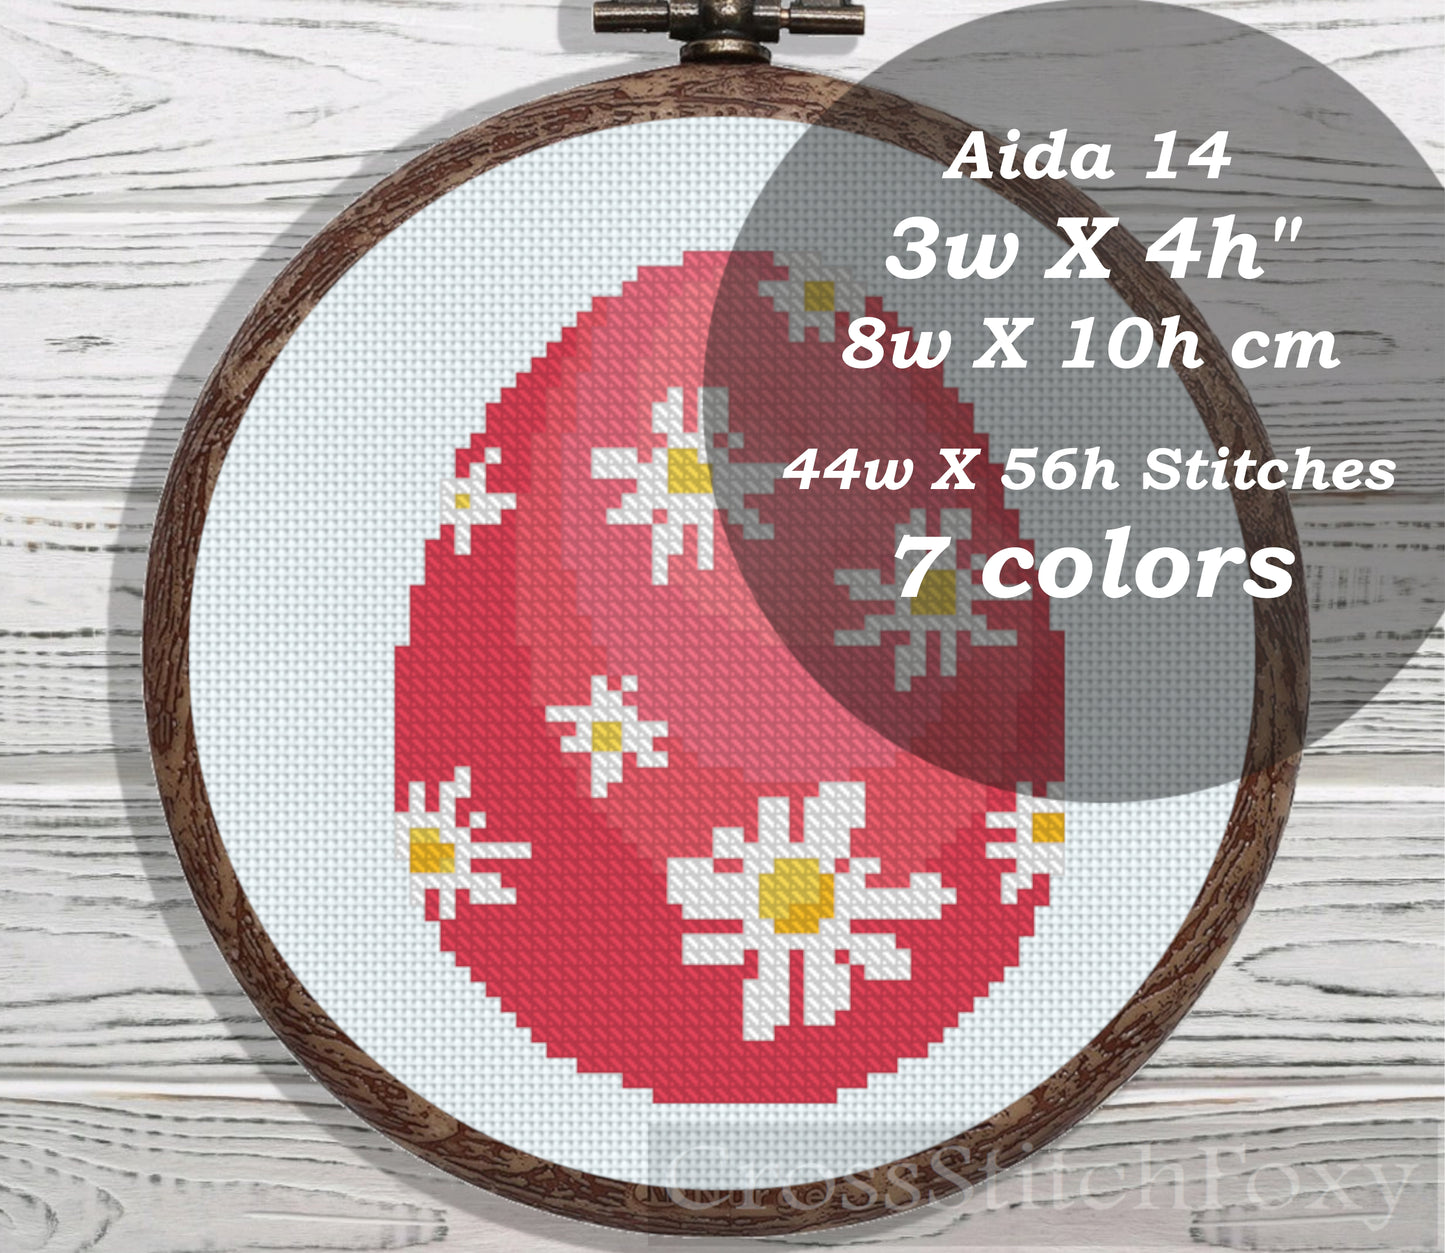 Red Floral Easter Egg cross stitch pattern